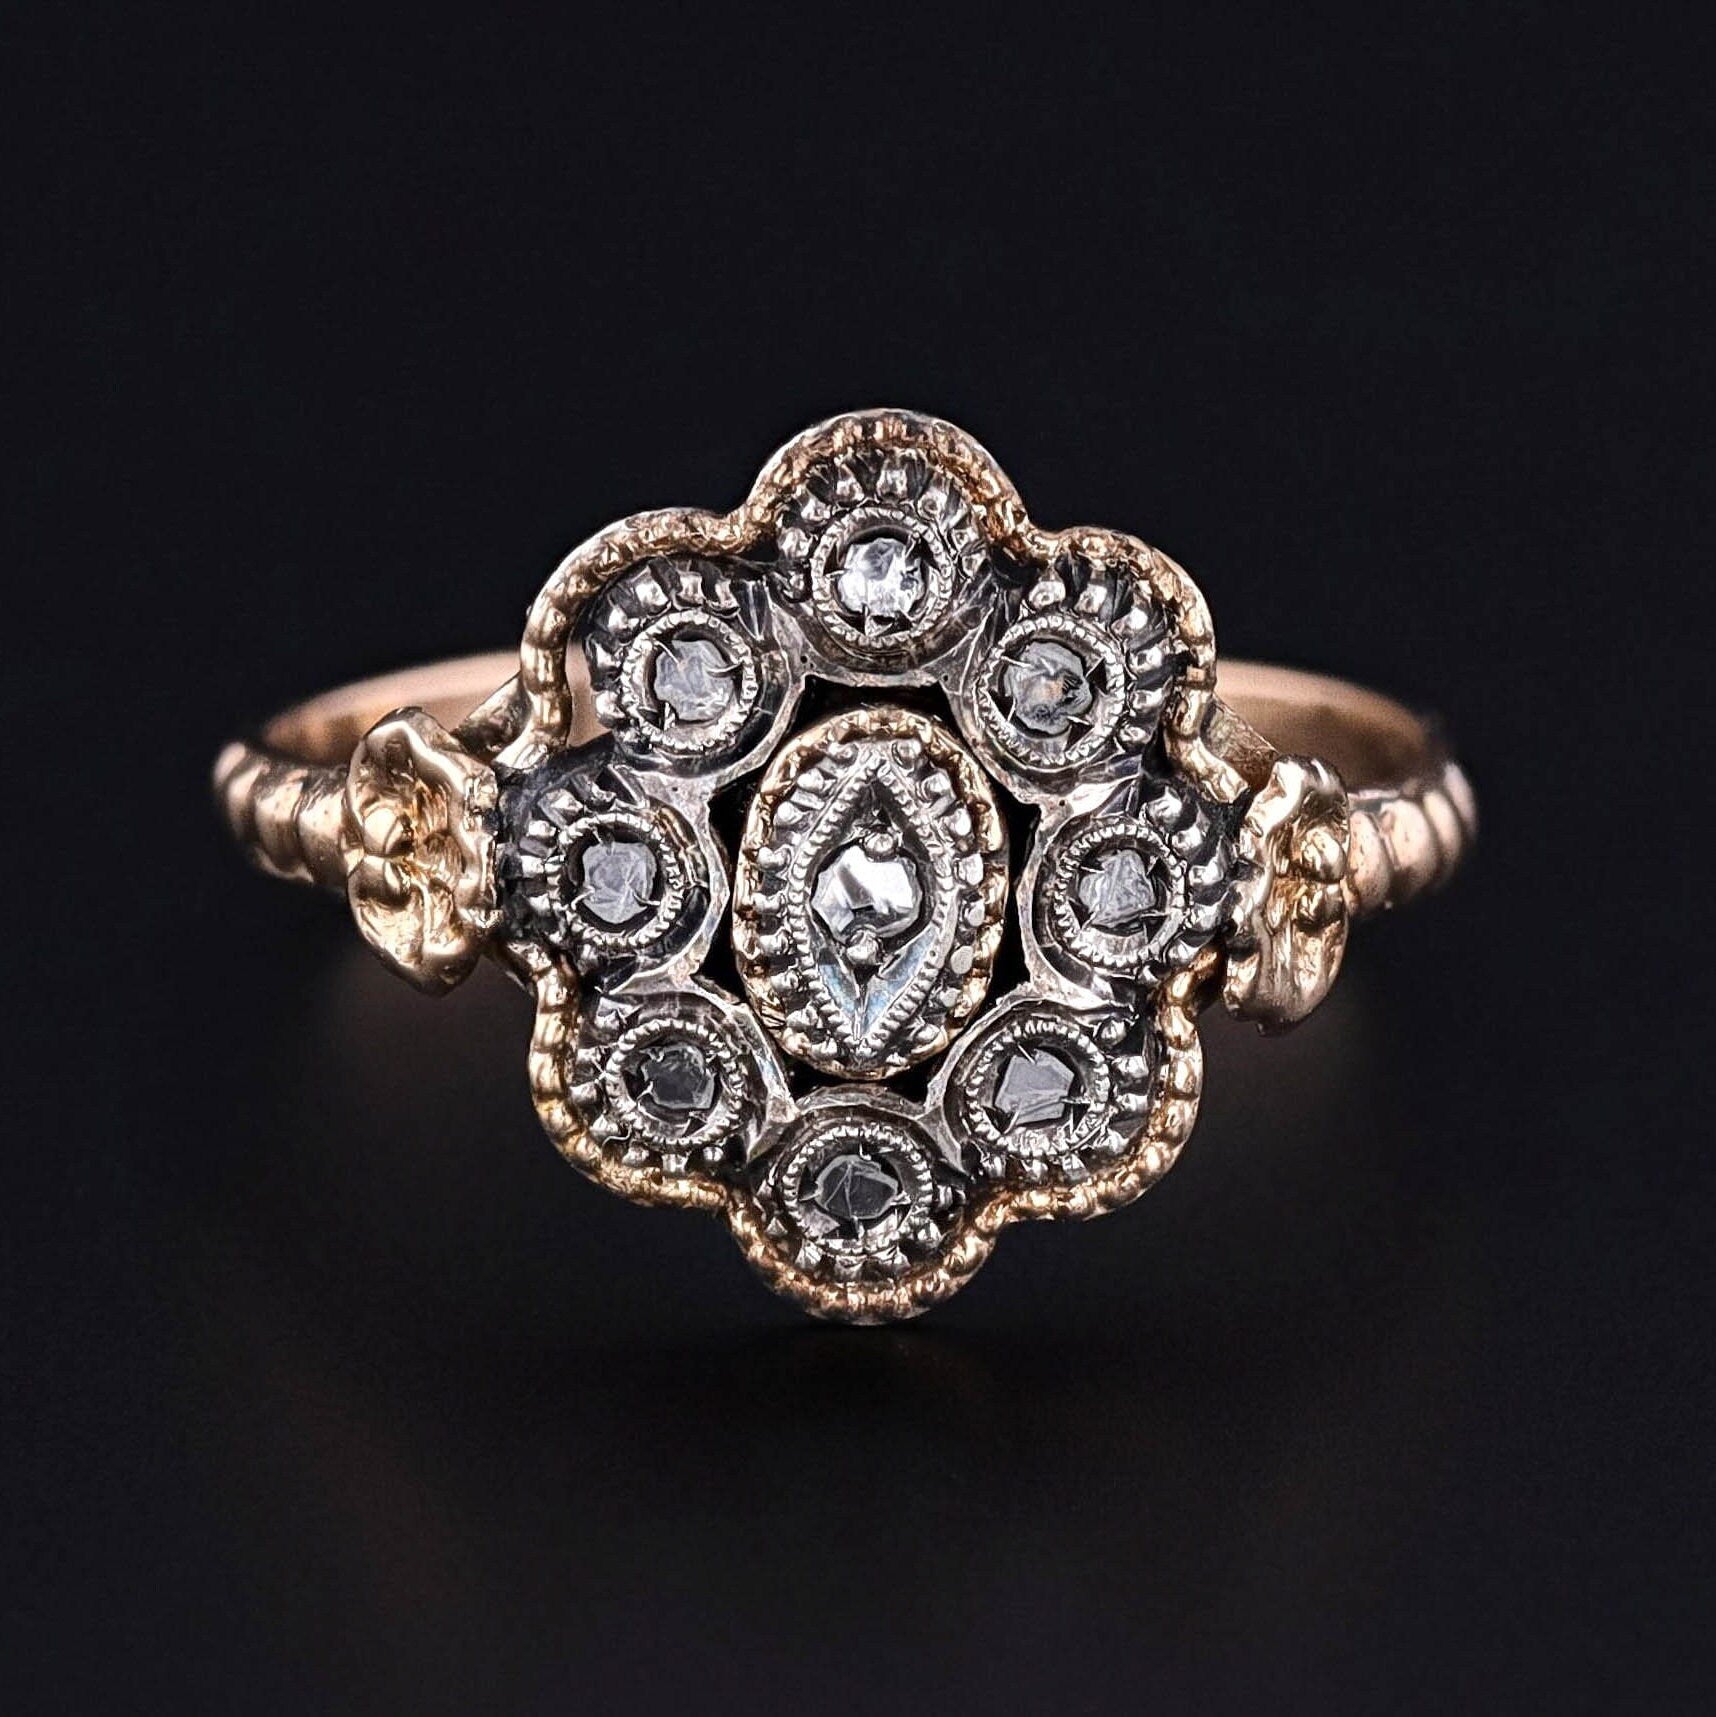 Vintage Diamond Ring 18k Gold with Silver Top